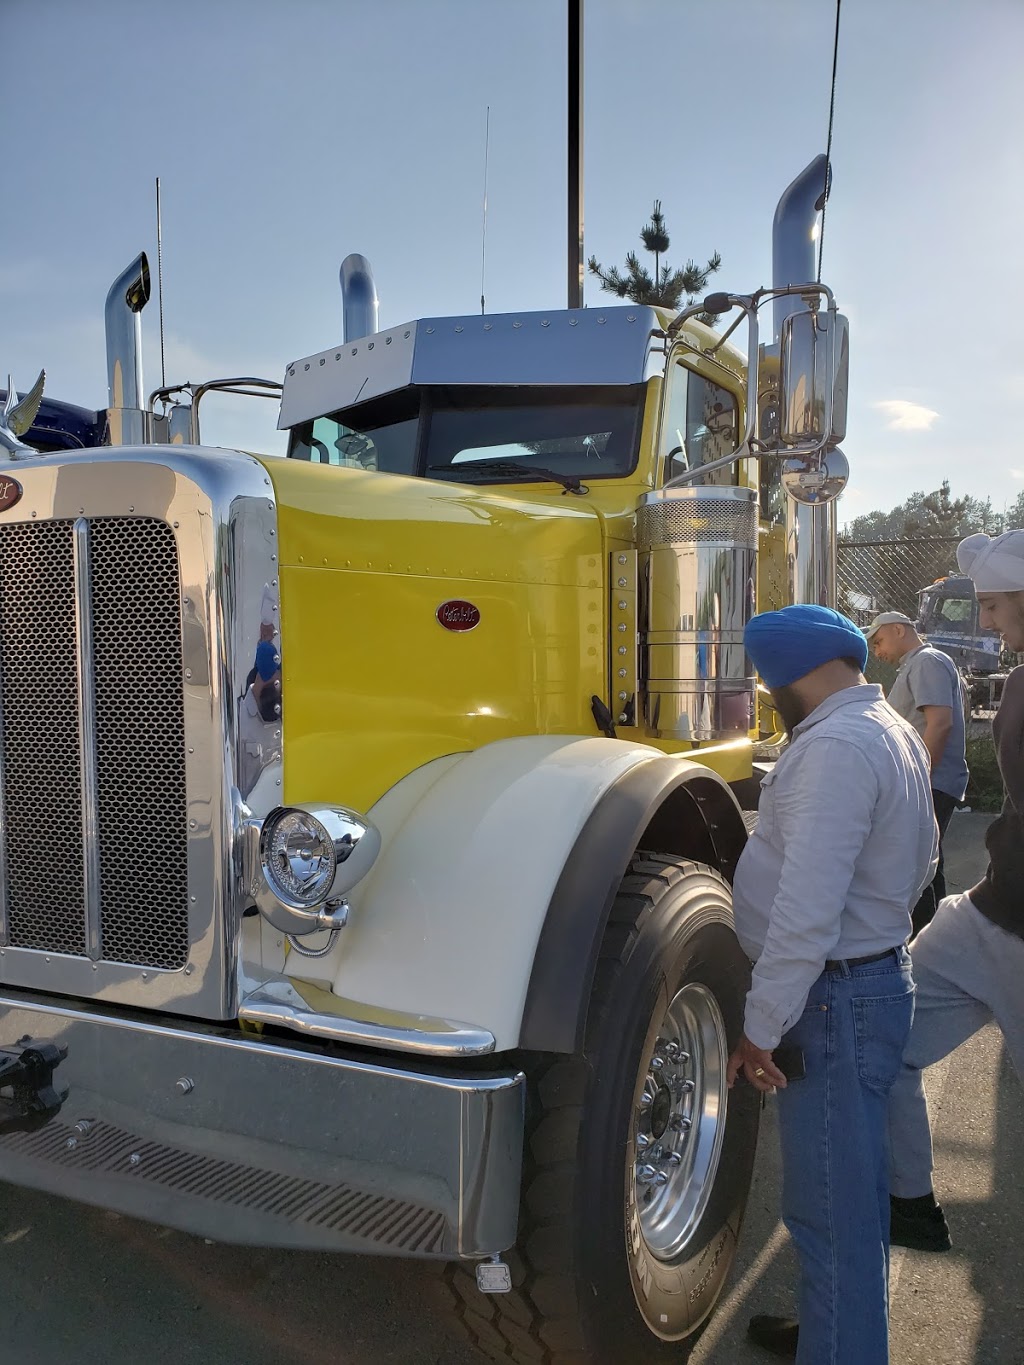 Peterbilt Pacific Inc | car repair | 1001 Coutts Way, Abbotsford, BC V2S 7M2, Canada | 6048533872 OR +1 604-853-3872